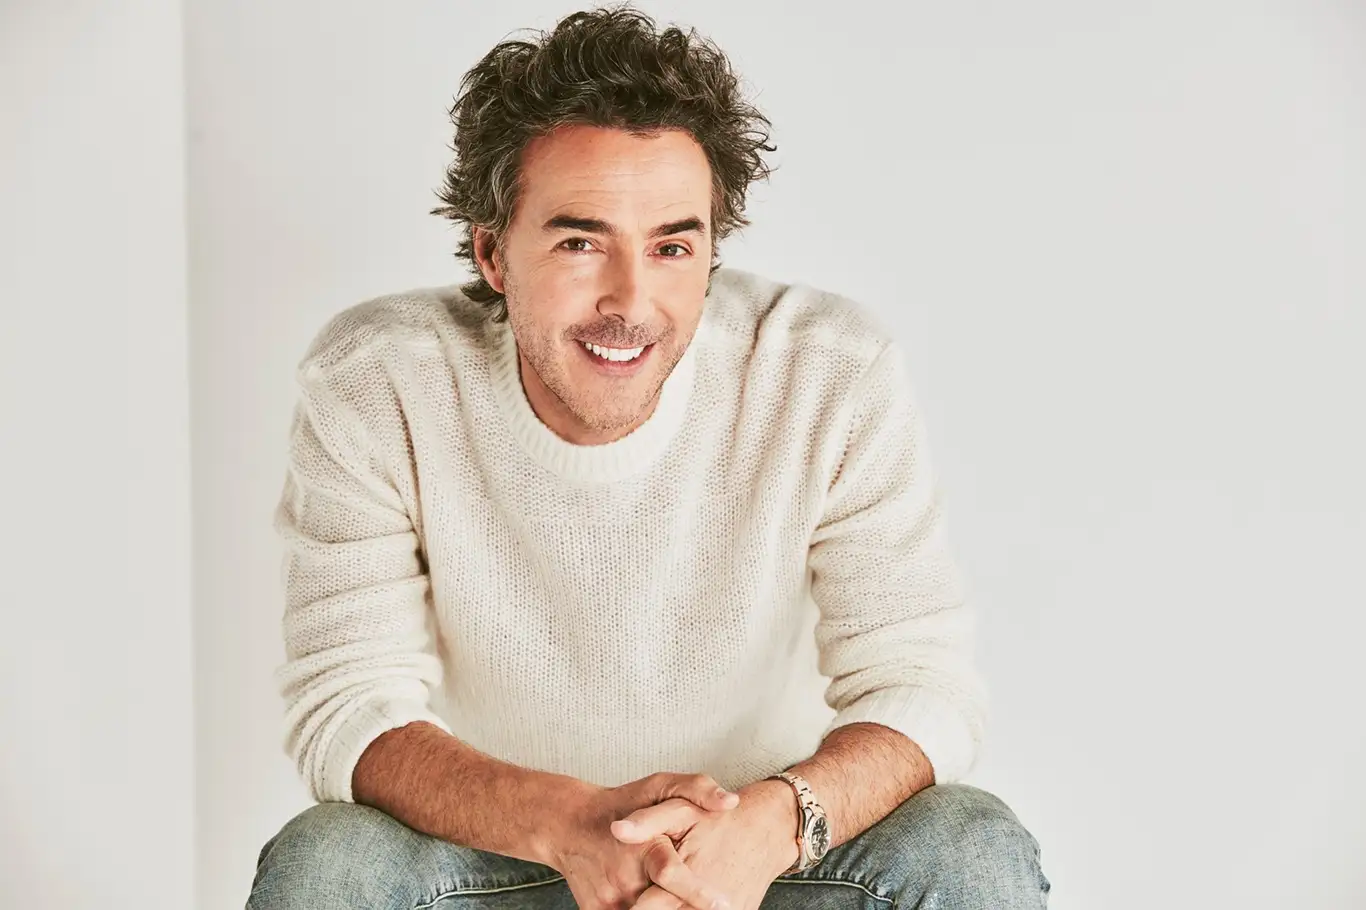 SHAWN LEVY TO RECEIVE CINEMACON DIRECTOR OF THE YEAR AWARD 